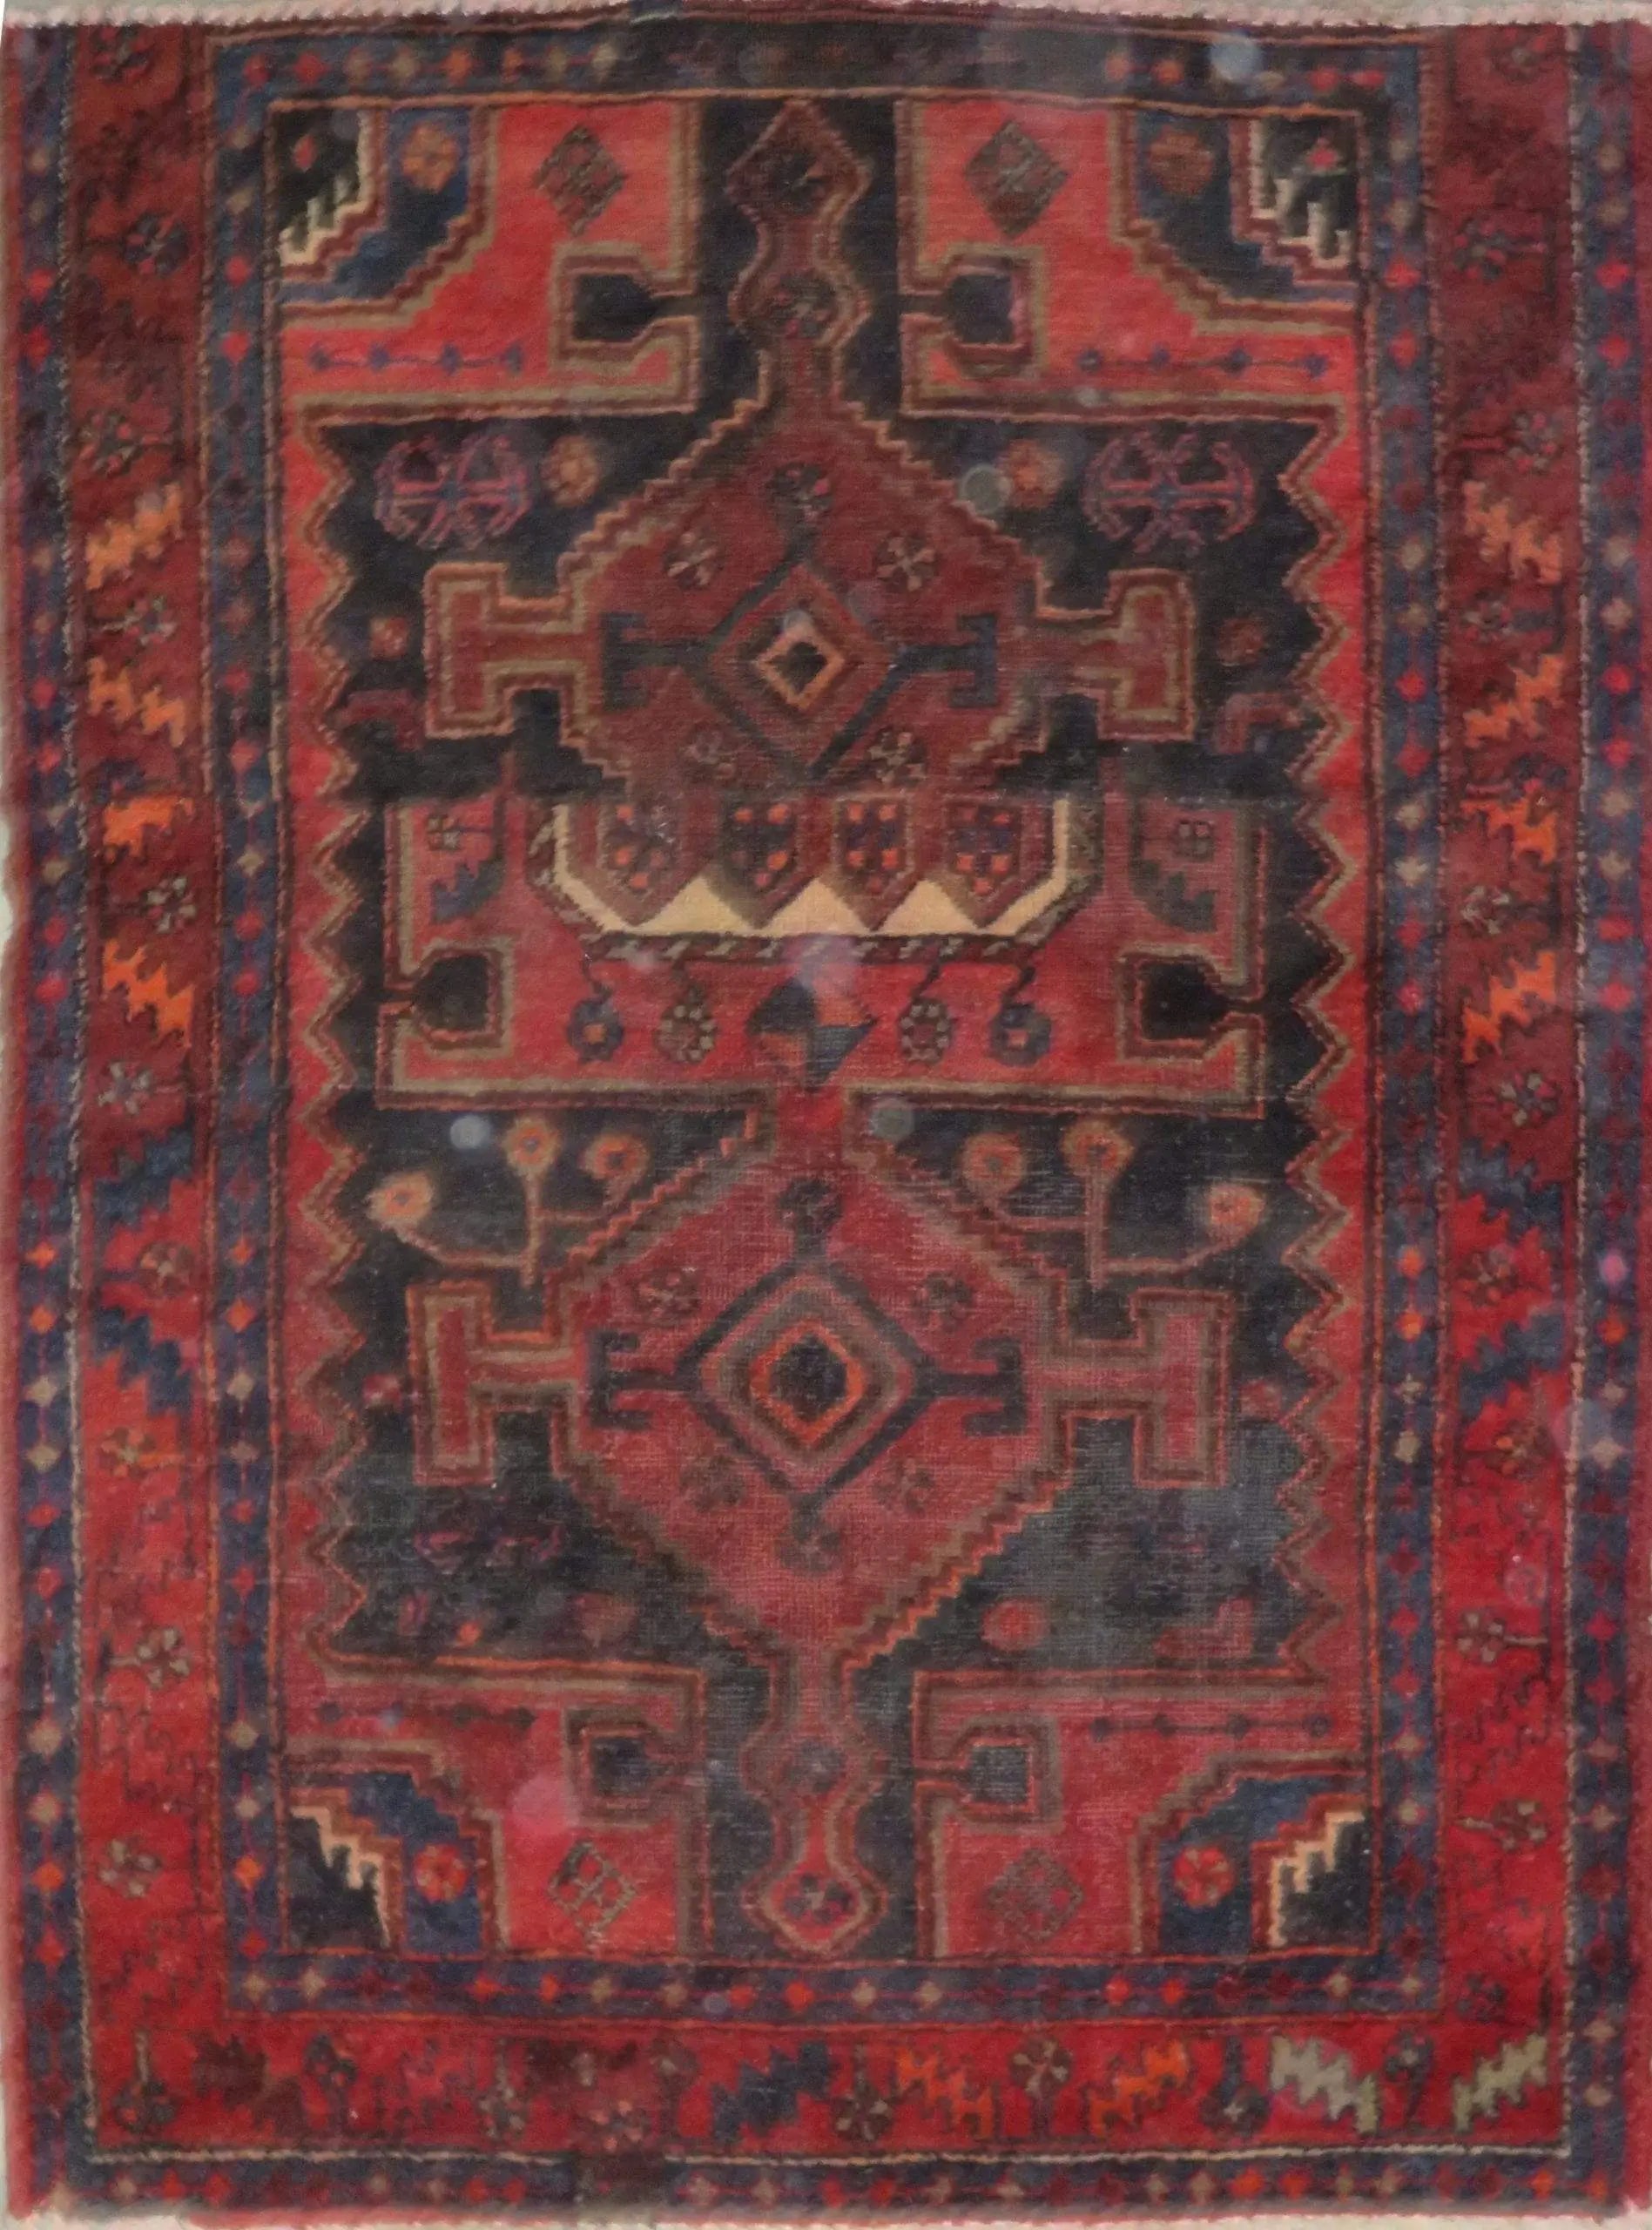 Hand-Knotted Persian Wool Rug _ Luxurious Vintage Design, 5'6" x 3'9", Artisan Crafted